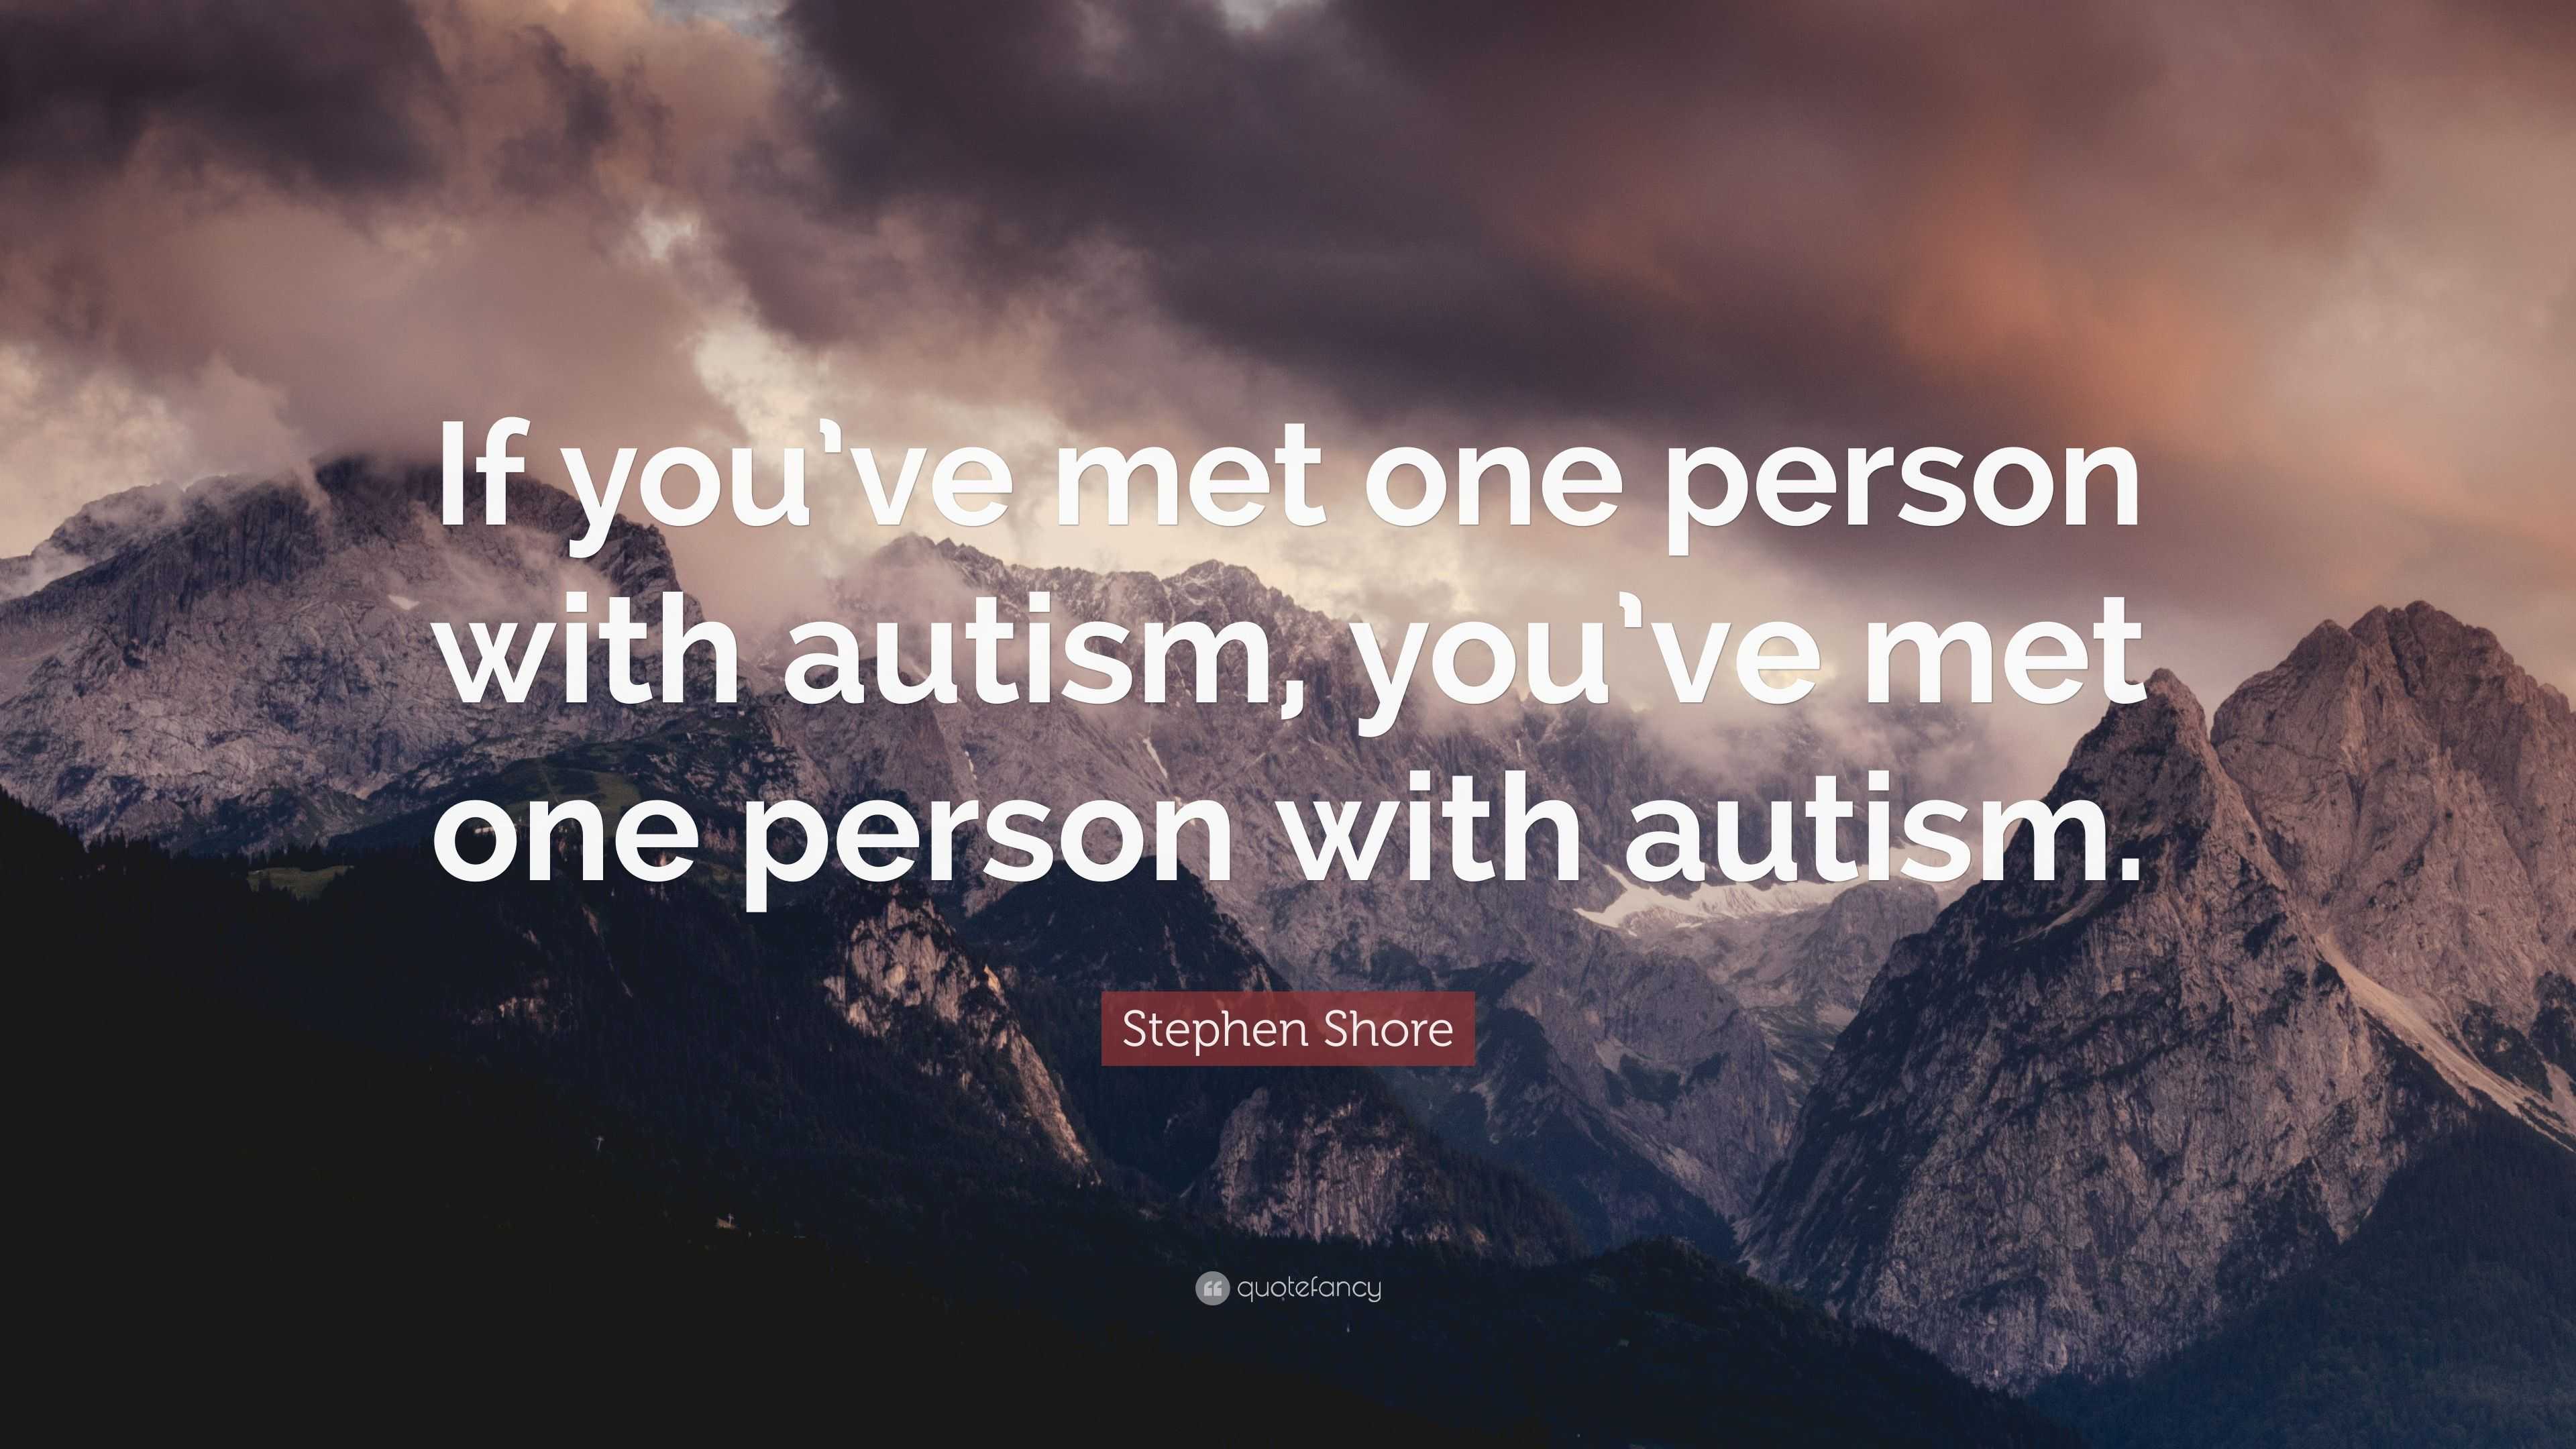 Stephen Shore Quote: “If you’ve met one person with autism, you’ve met ...